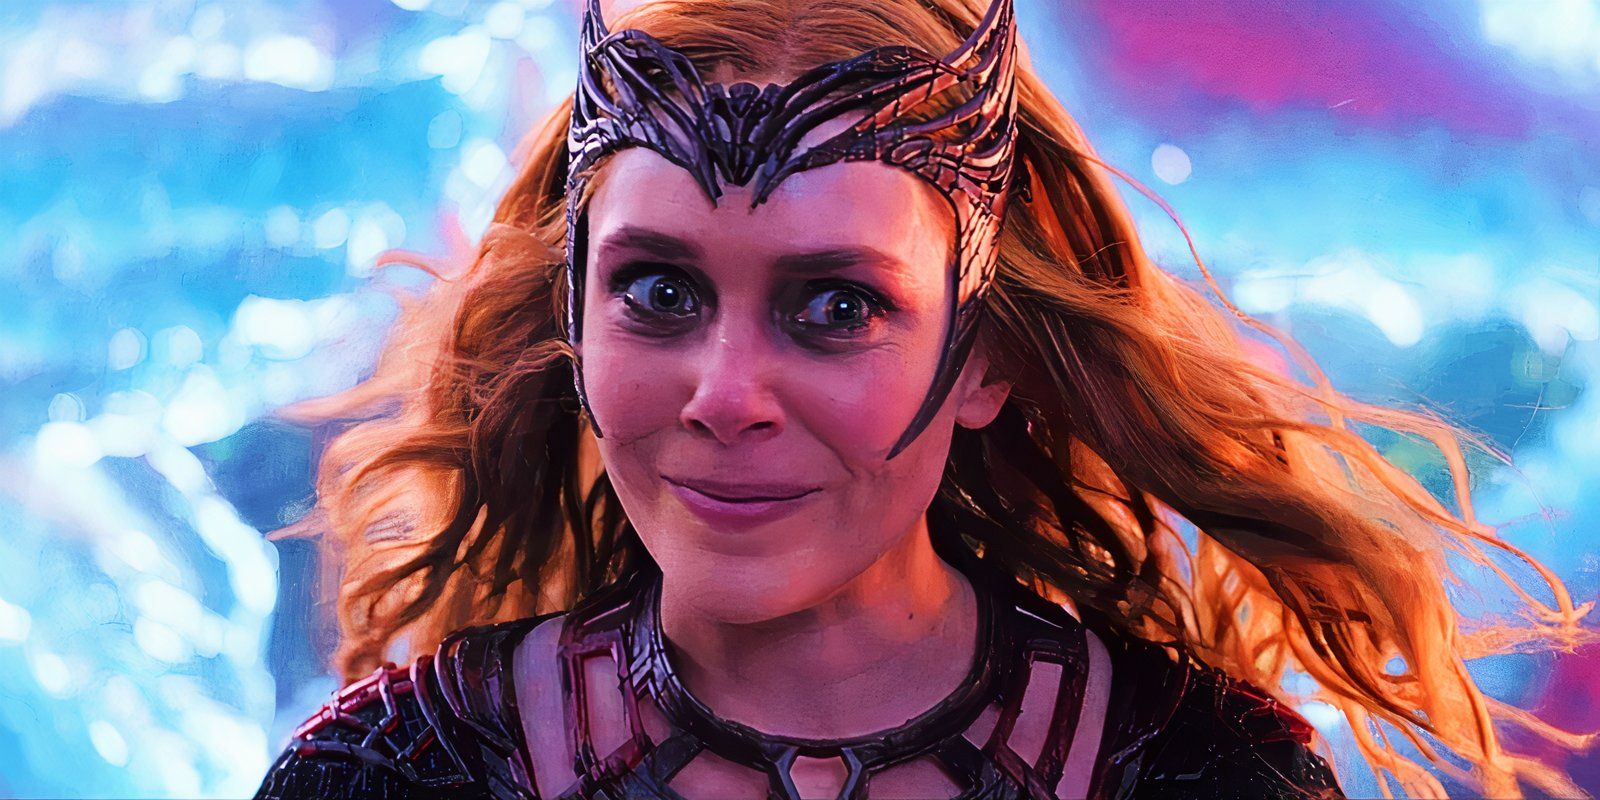 Elizabeth Olsen As Scarlet Witch In Full Costume With A Deranged Smile In Doctor Strange in the Multiverse of Madness